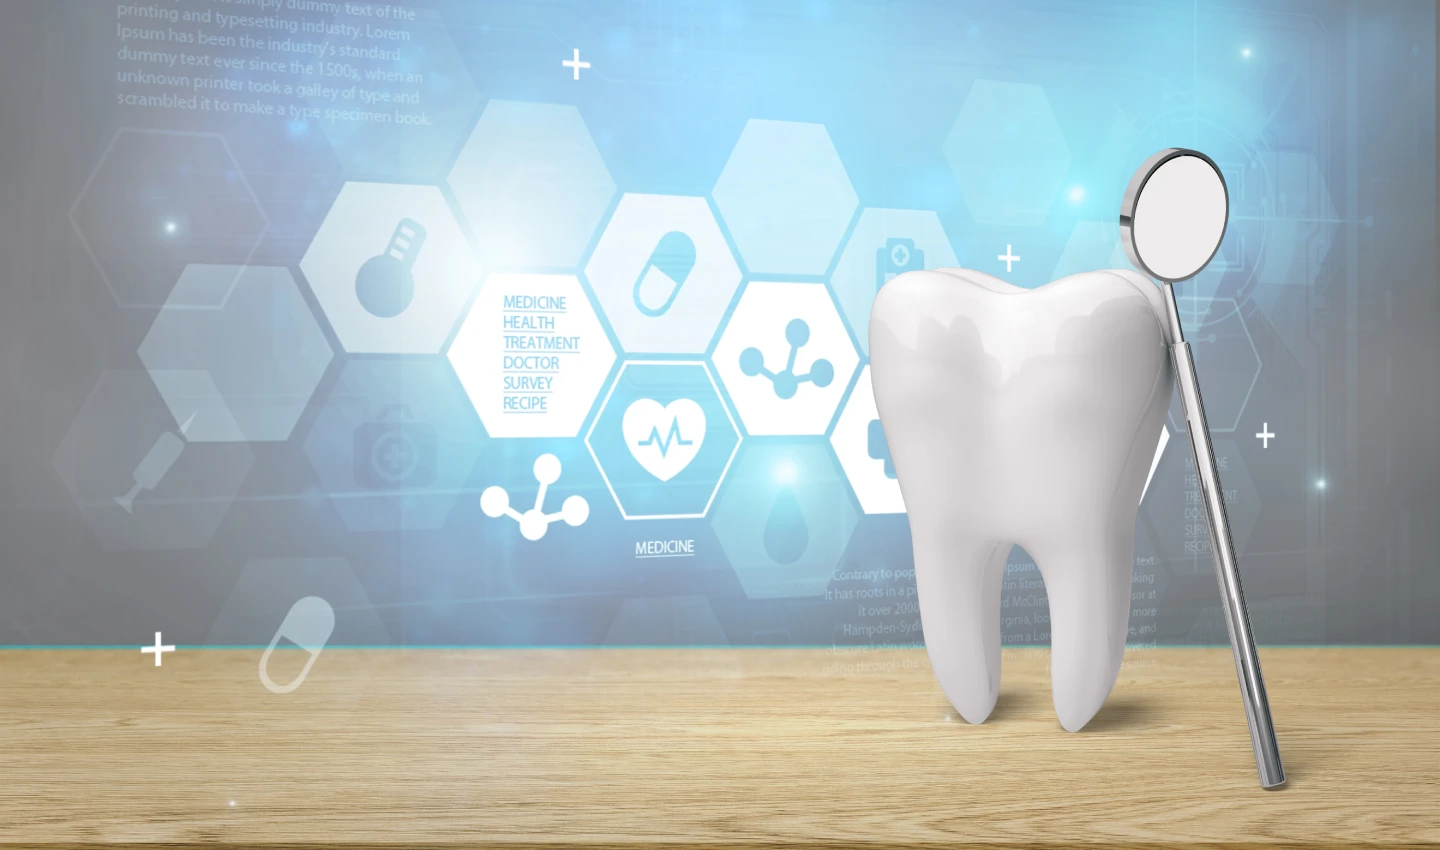 A statue of teeth representing the future of teeth cleaning with revolutionary innovations like electric toothbrushes, ultrasonic scalers, and smart flossers to future-proof your smile.